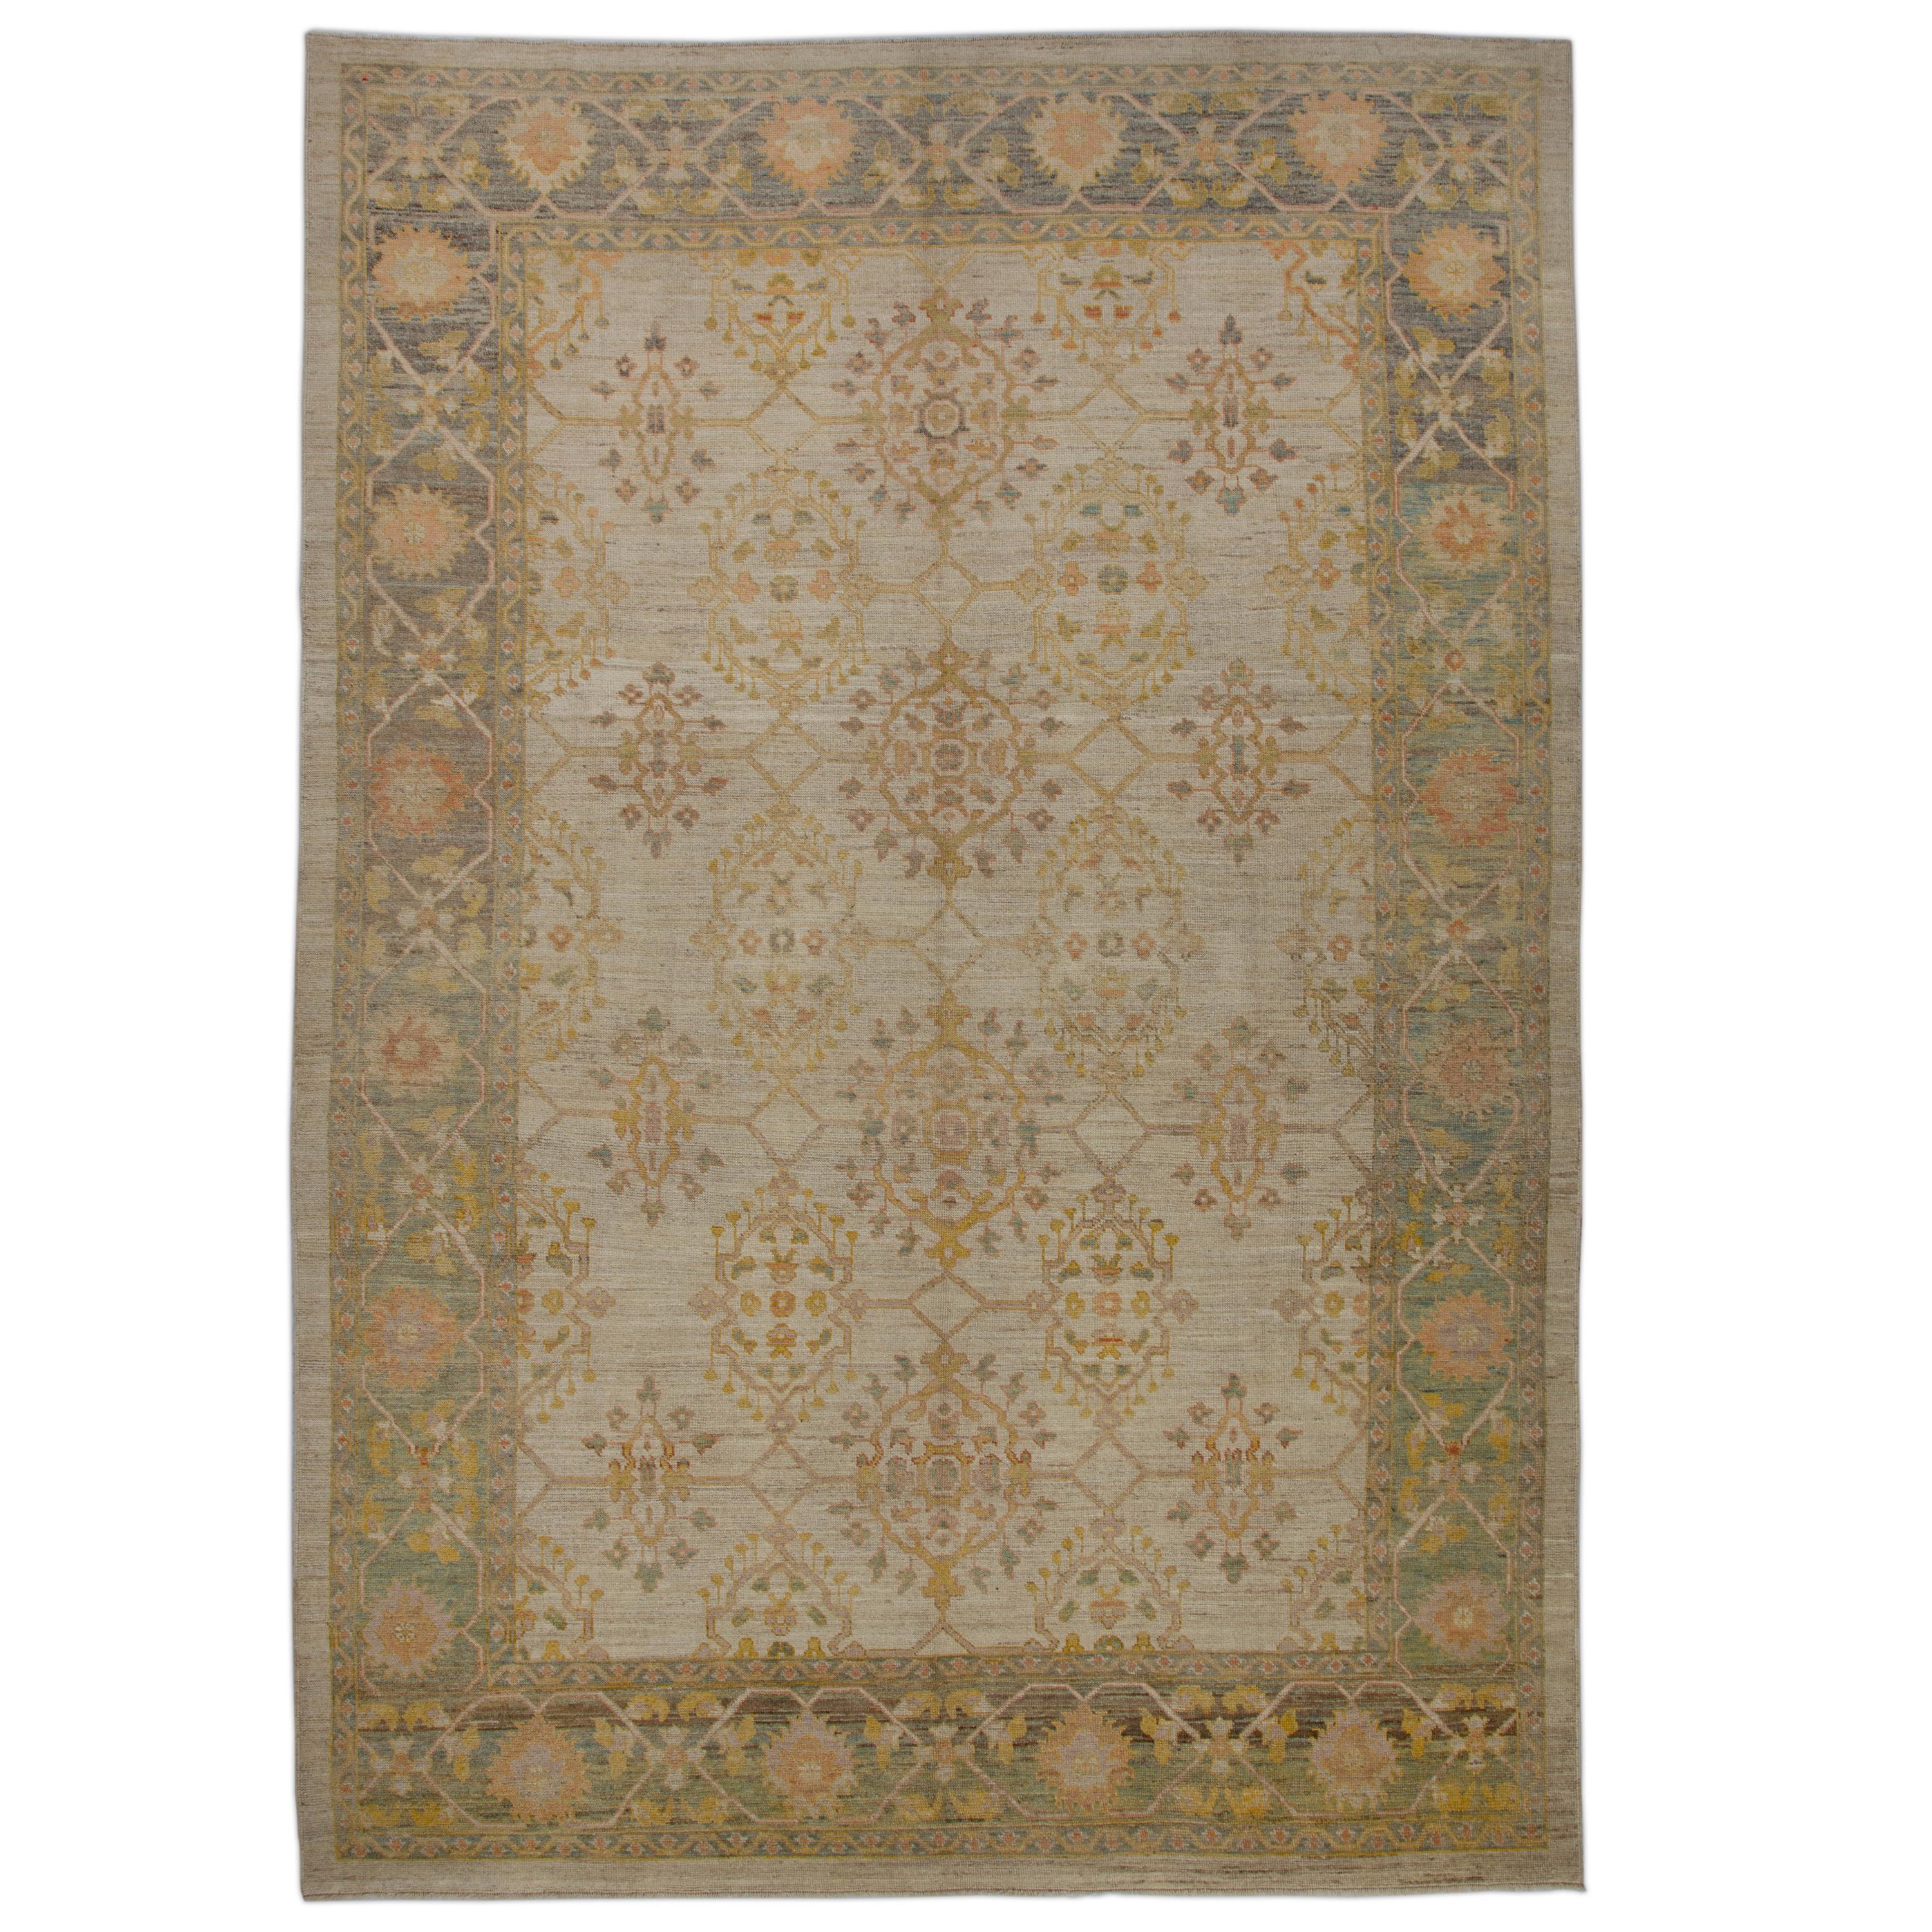  Contemporary Turkish Oushak Rug with Floral Medallions in Brown and Beige